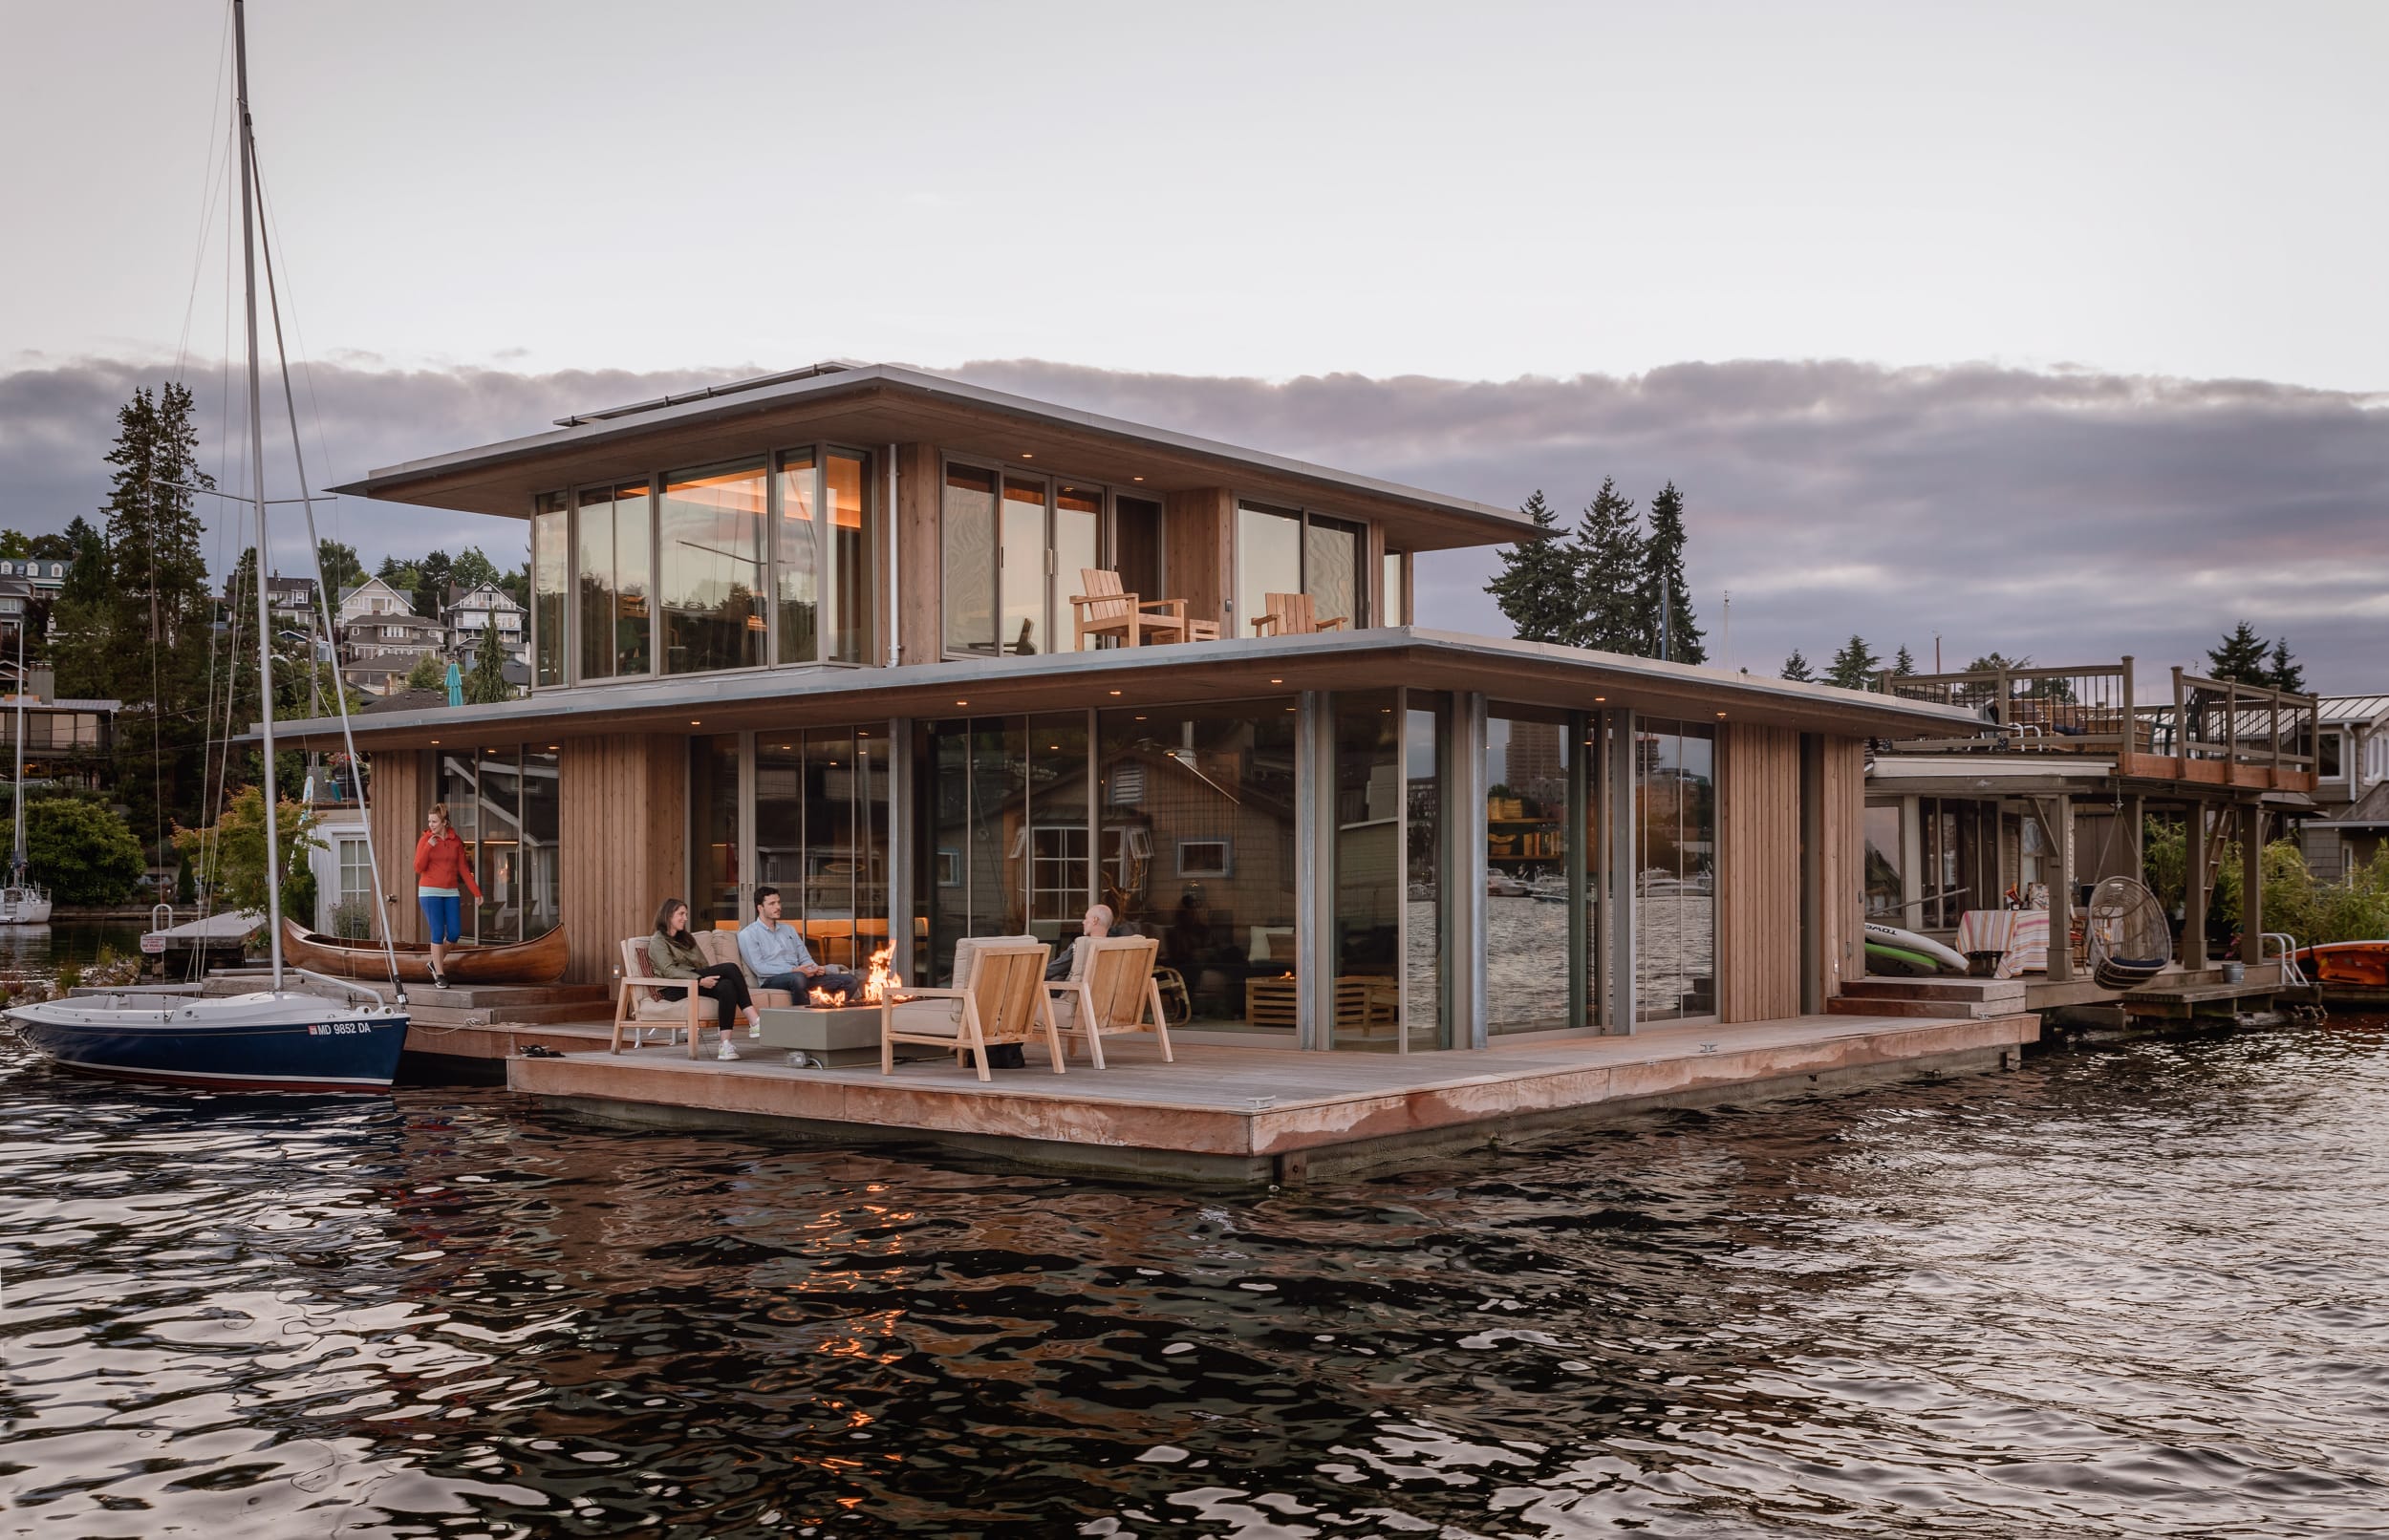 A modern floating home crafted by a skilled carpenter on a body of water.